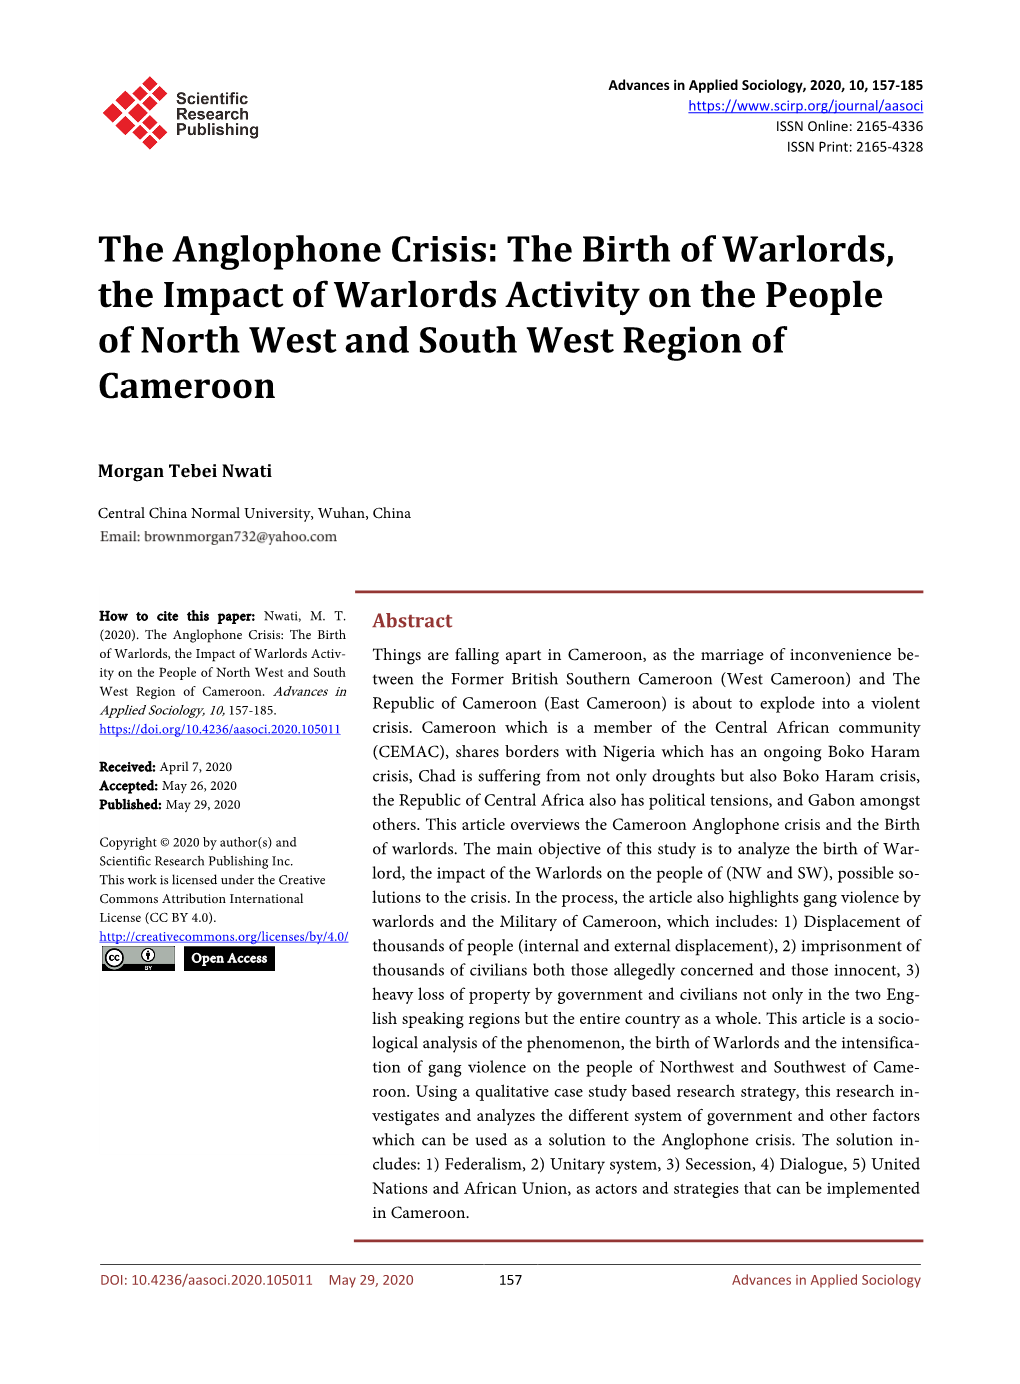 The Anglophone Crisis: the Birth of Warlords, the Impact of Warlords Activity on the People of North West and South West Region of Cameroon